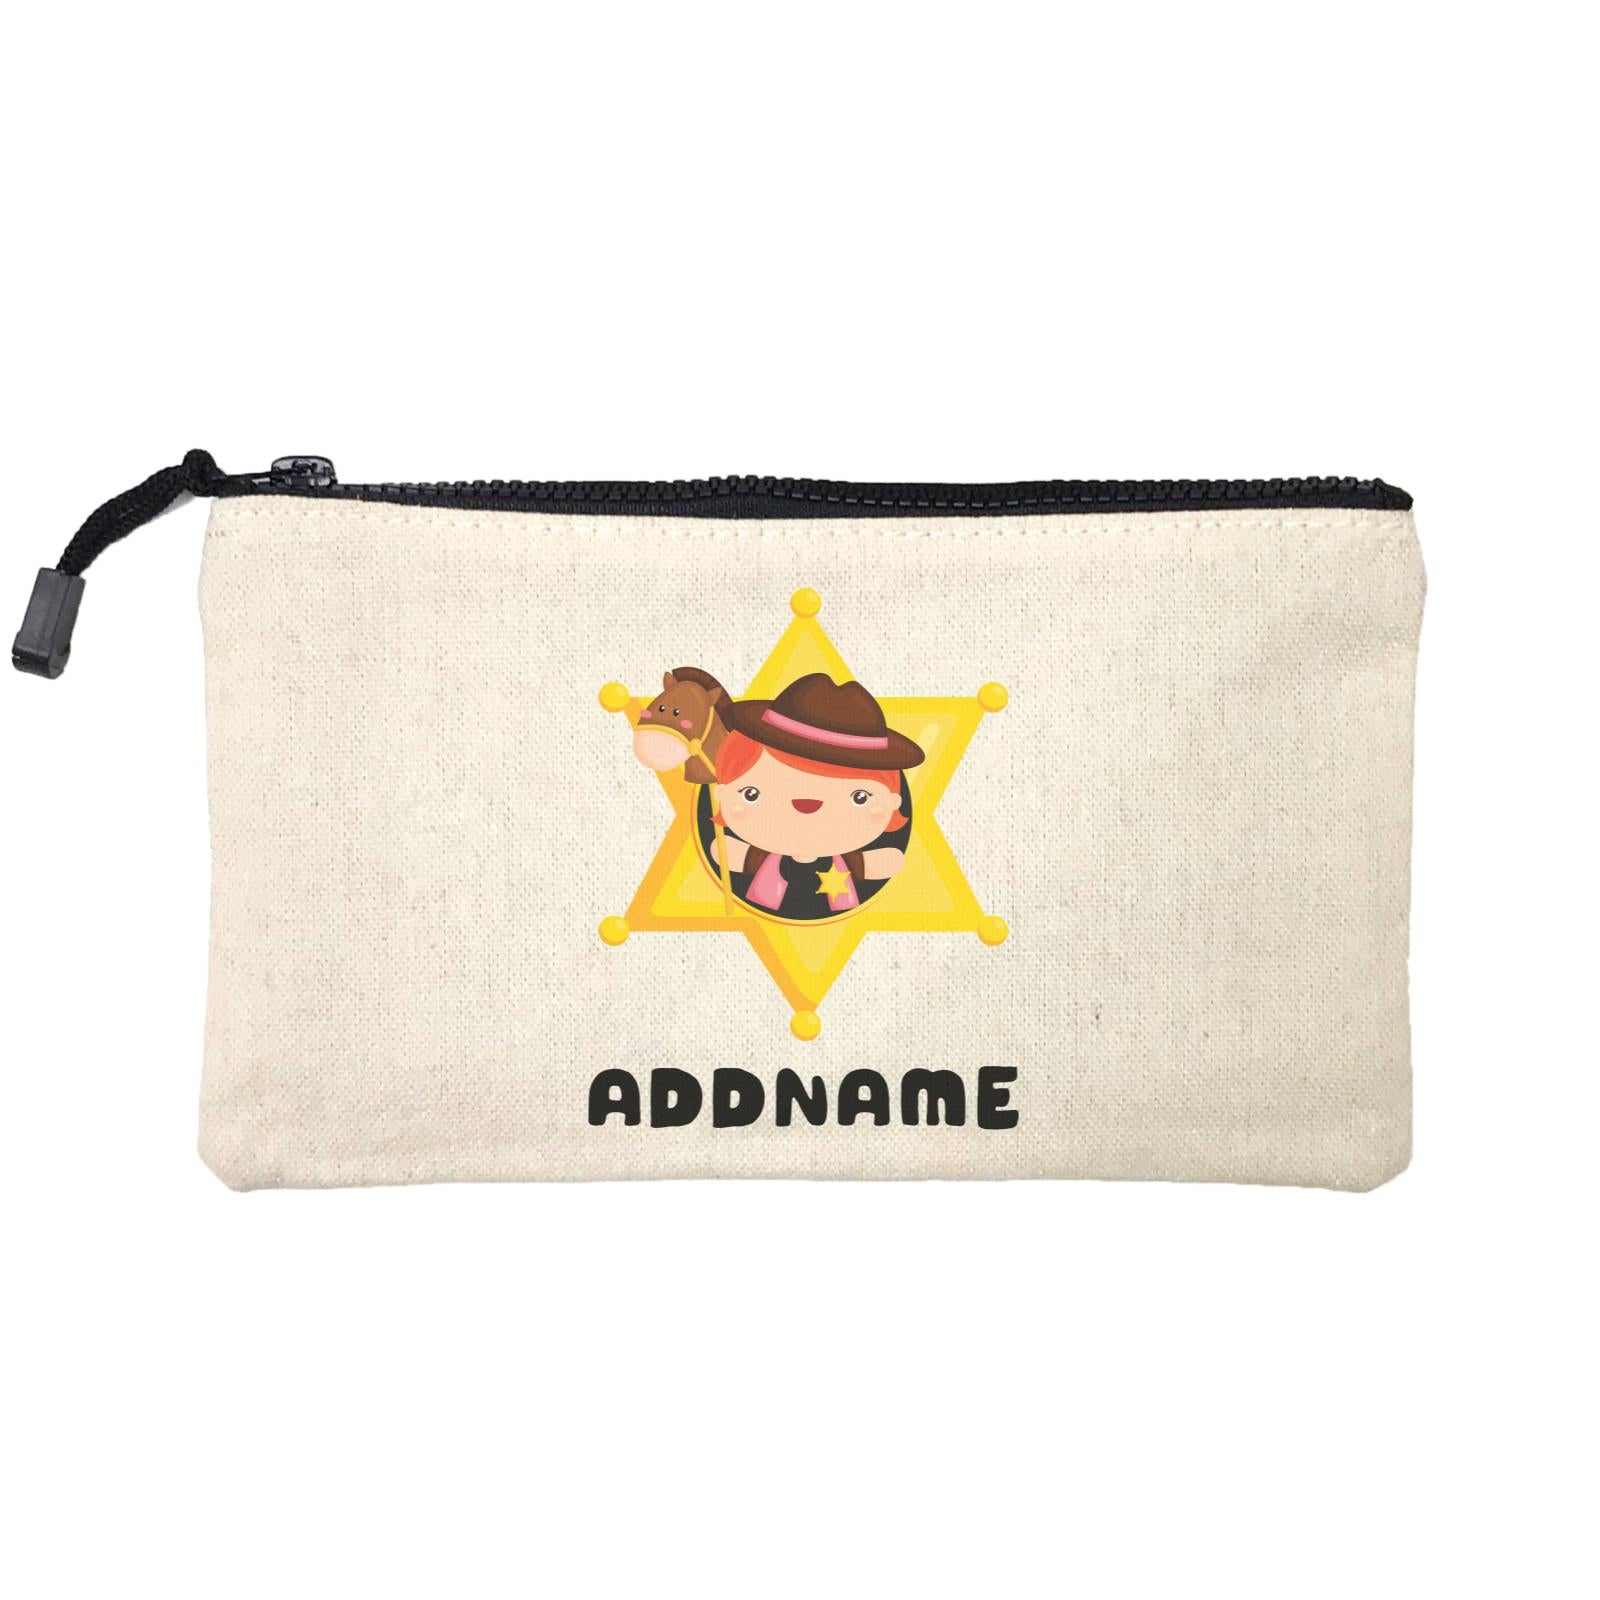 Birthday Cowboy Style Little Cowgirl Holding Toy Horse In Star Badge Addname Mini Accessories Stationery Pouch